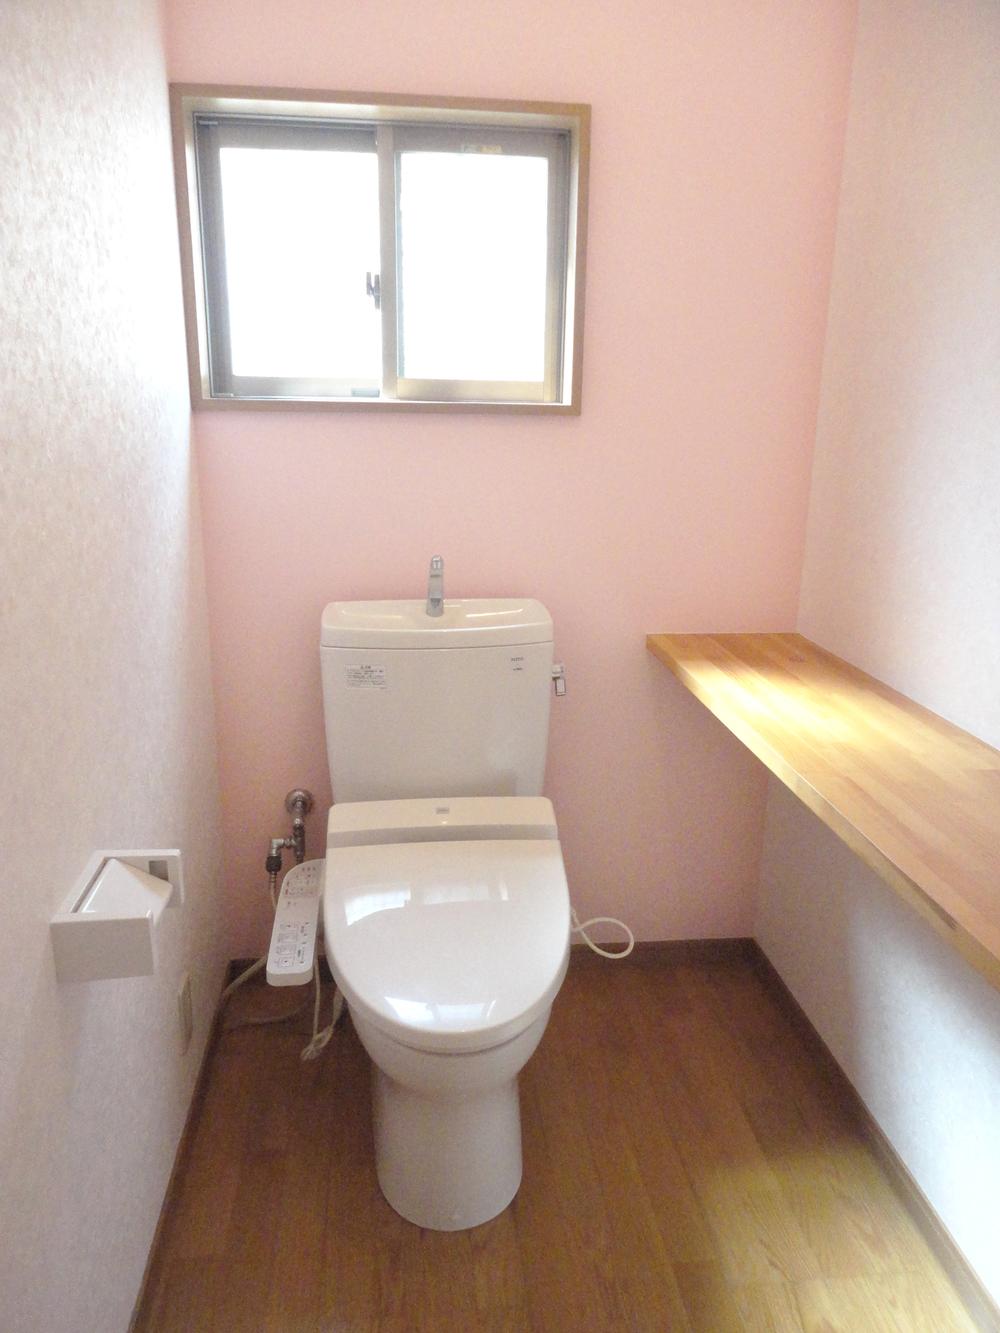 Toilet. It is a spacious bathroom with a space of spread. Also comes with a counter (September 2013) Shooting